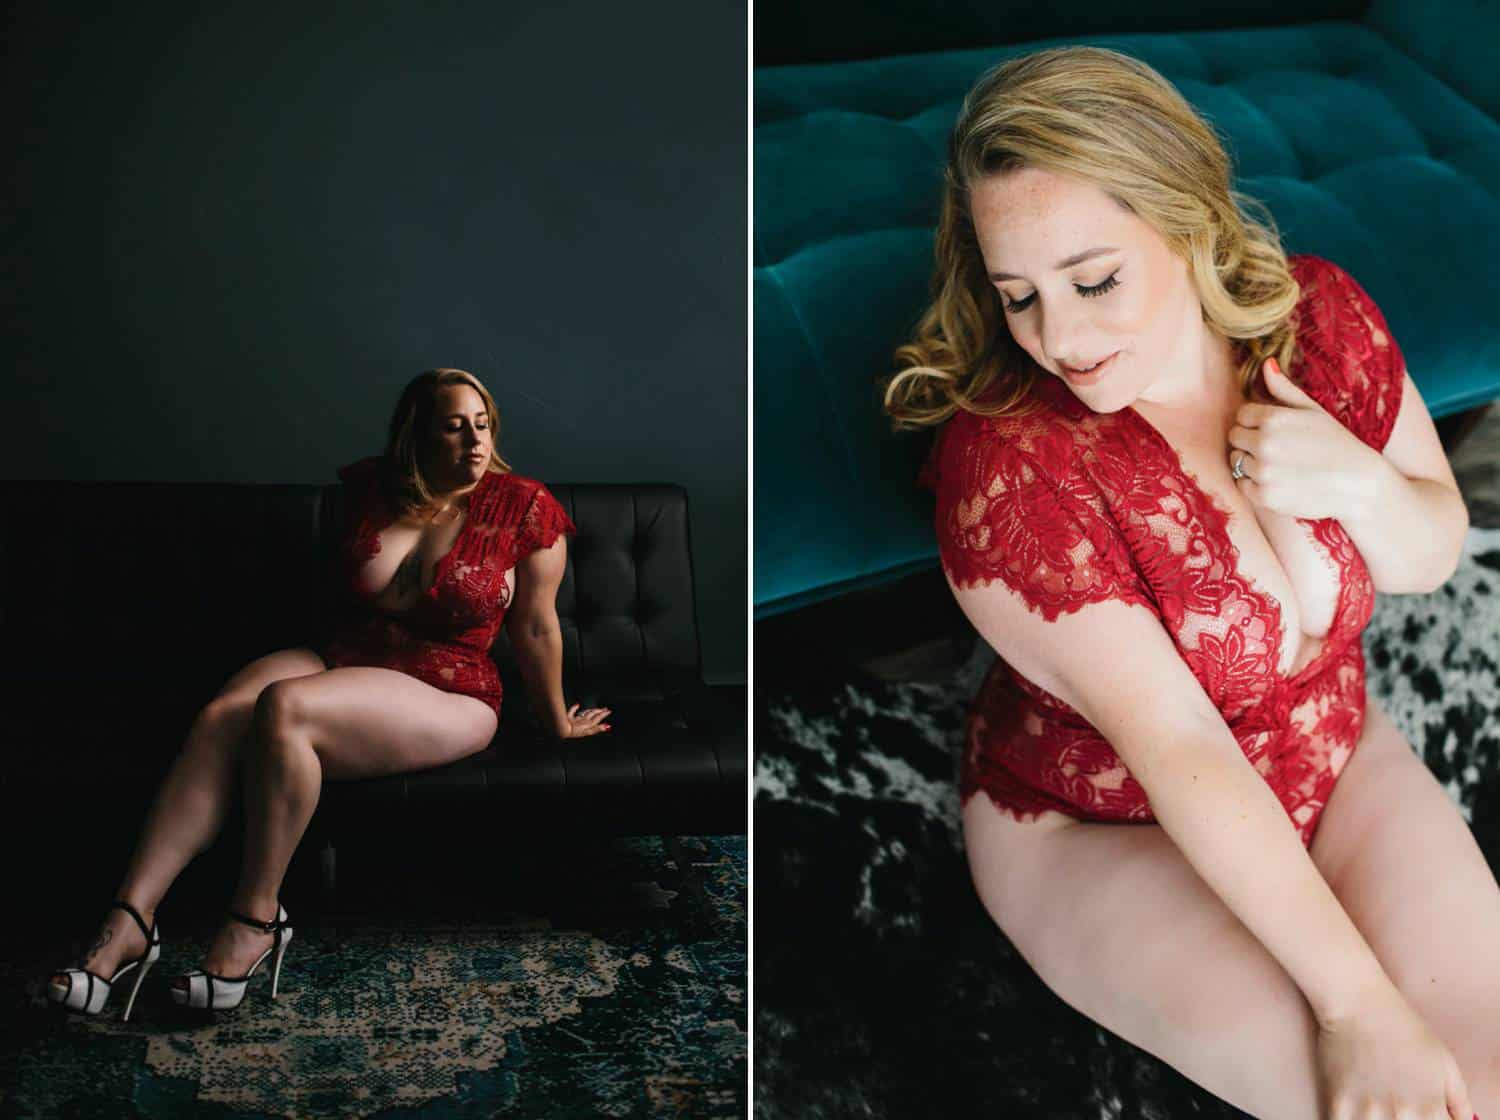 Two photos created in a dark photography studio showcase a sensually-posed blonde woman wearing a red neglige and high heels.